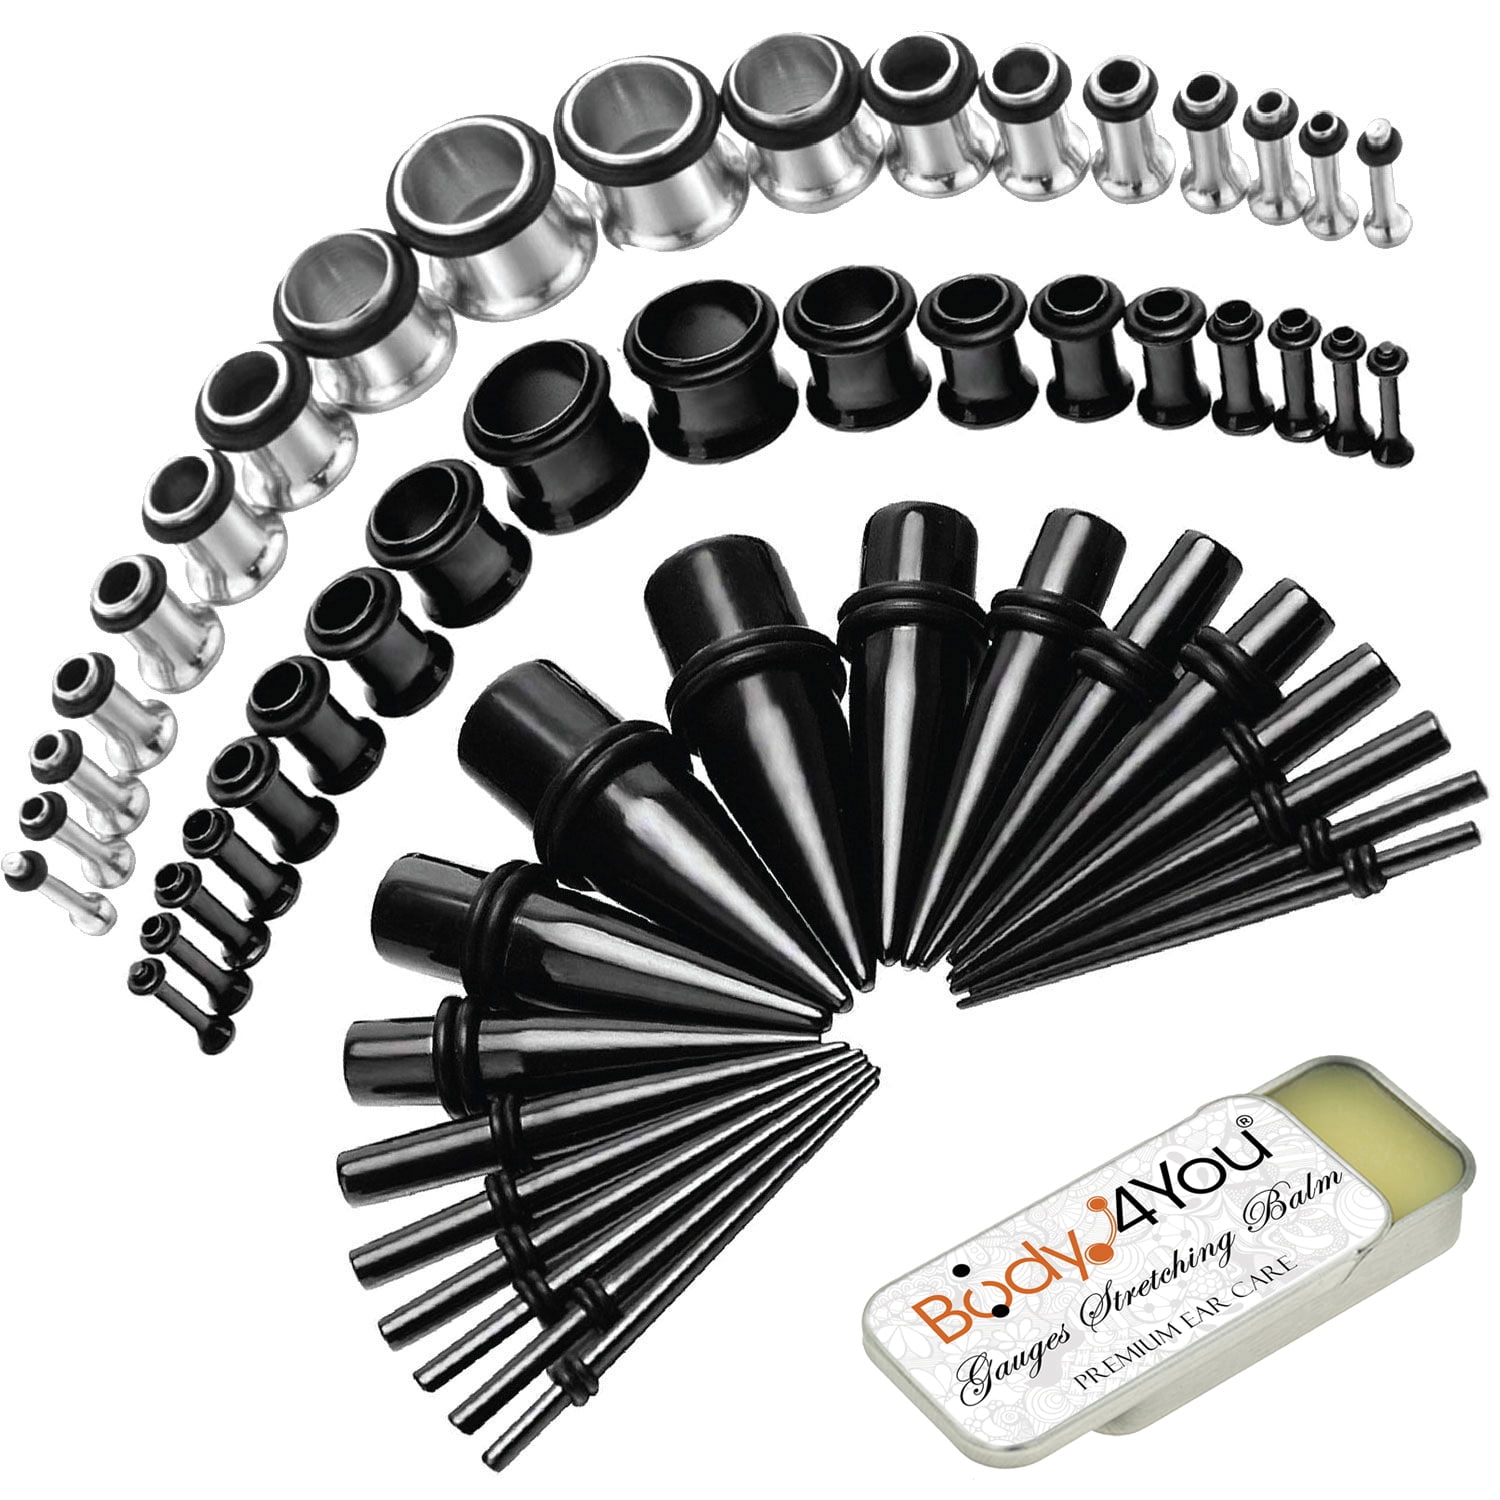 Details about   36pcs Ear Tapers Stretching Kits Stainless Steel Ear Gauges Plug Tunnels 14G-00G